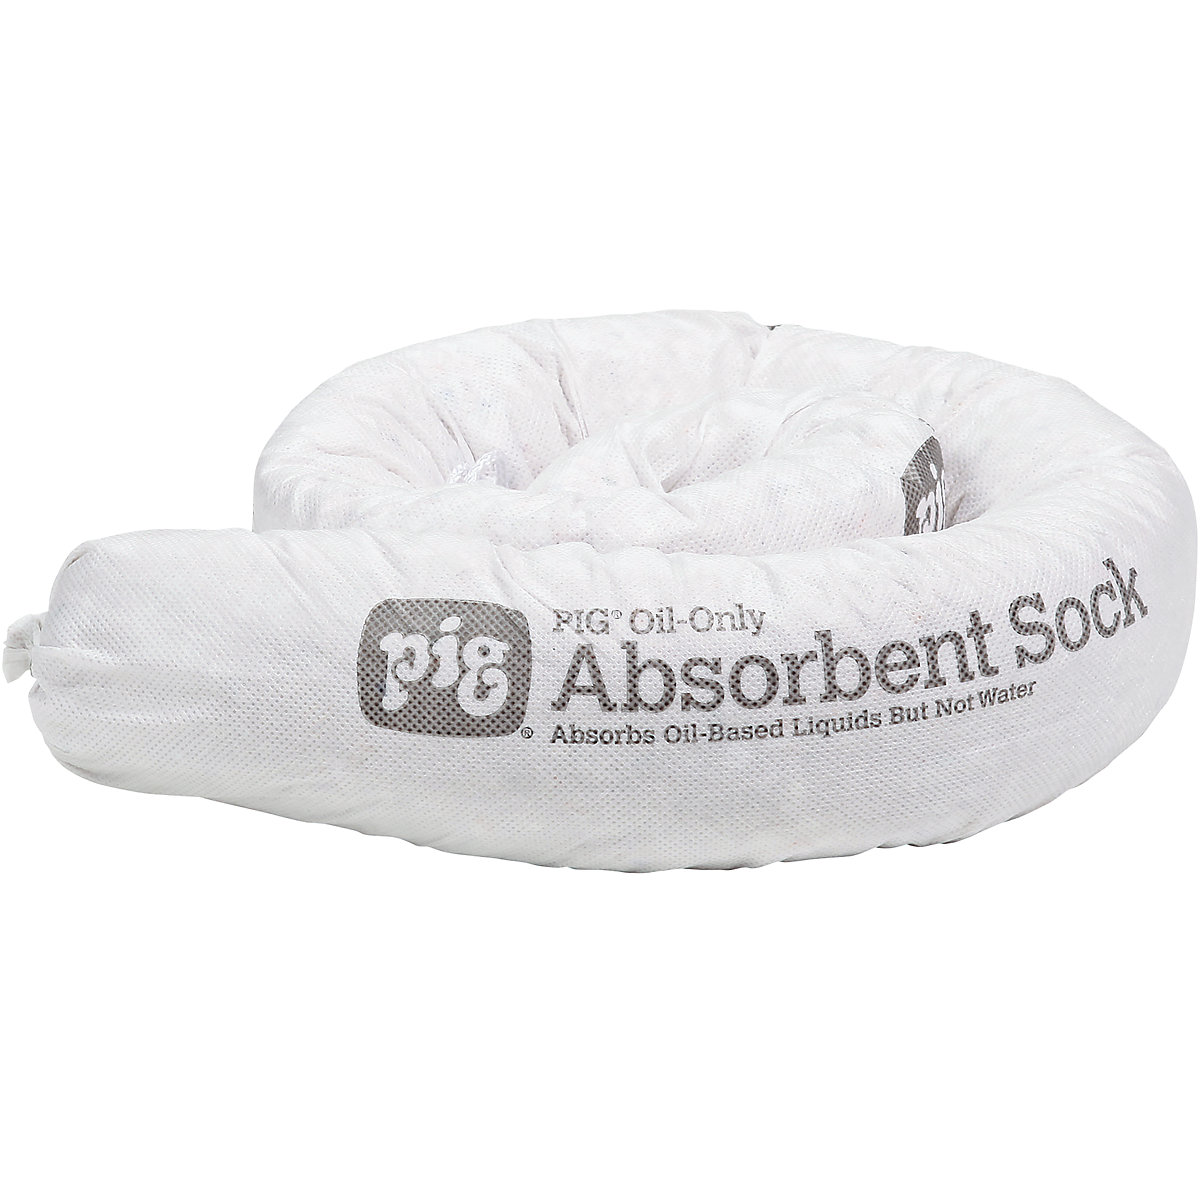 Oil-Only absorbent sheeting sock - PIG